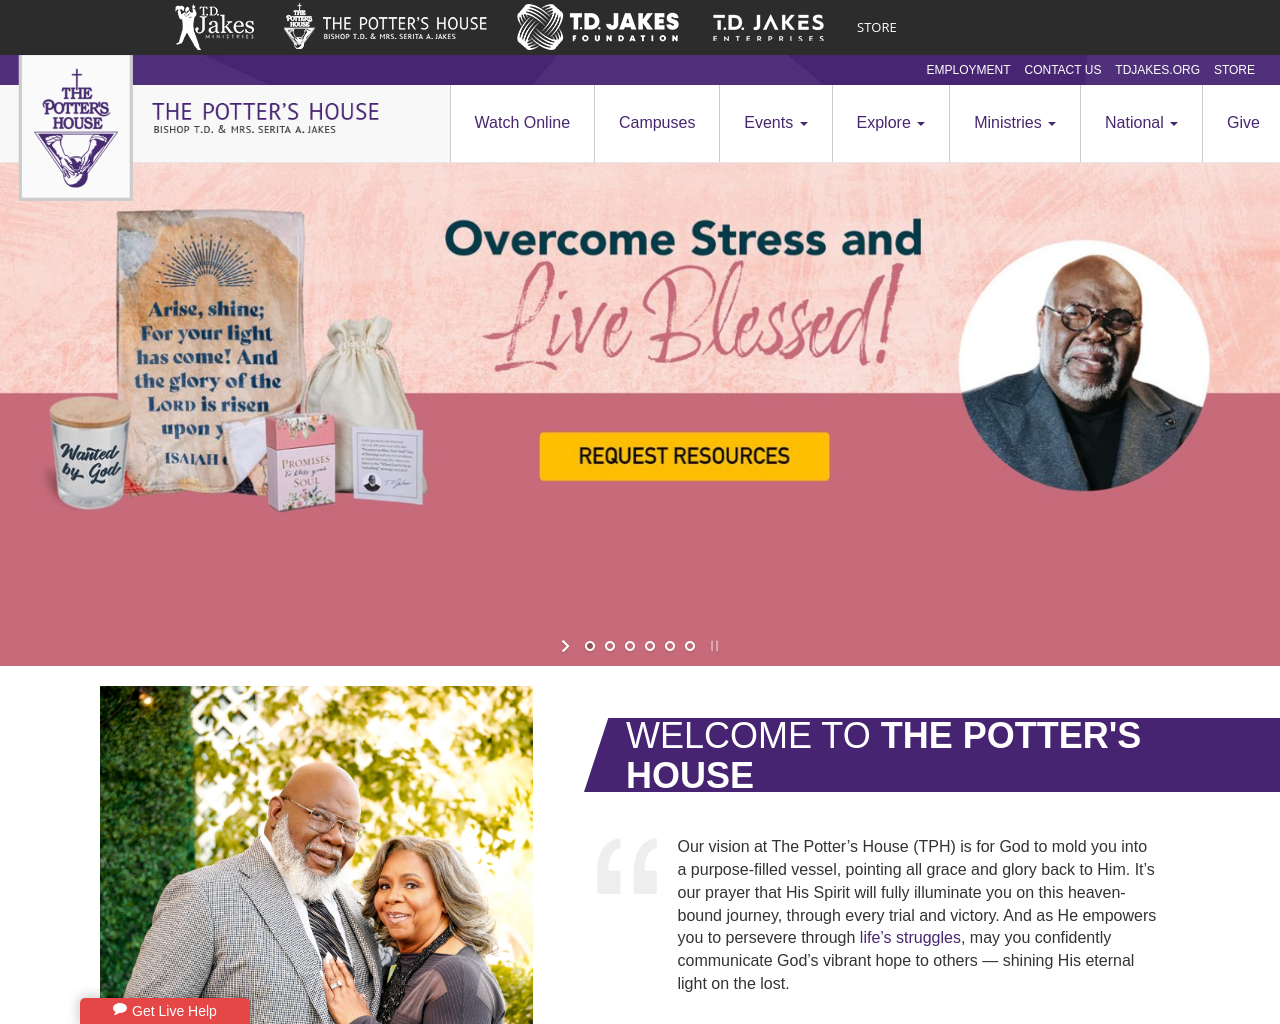 thepottershouse.org